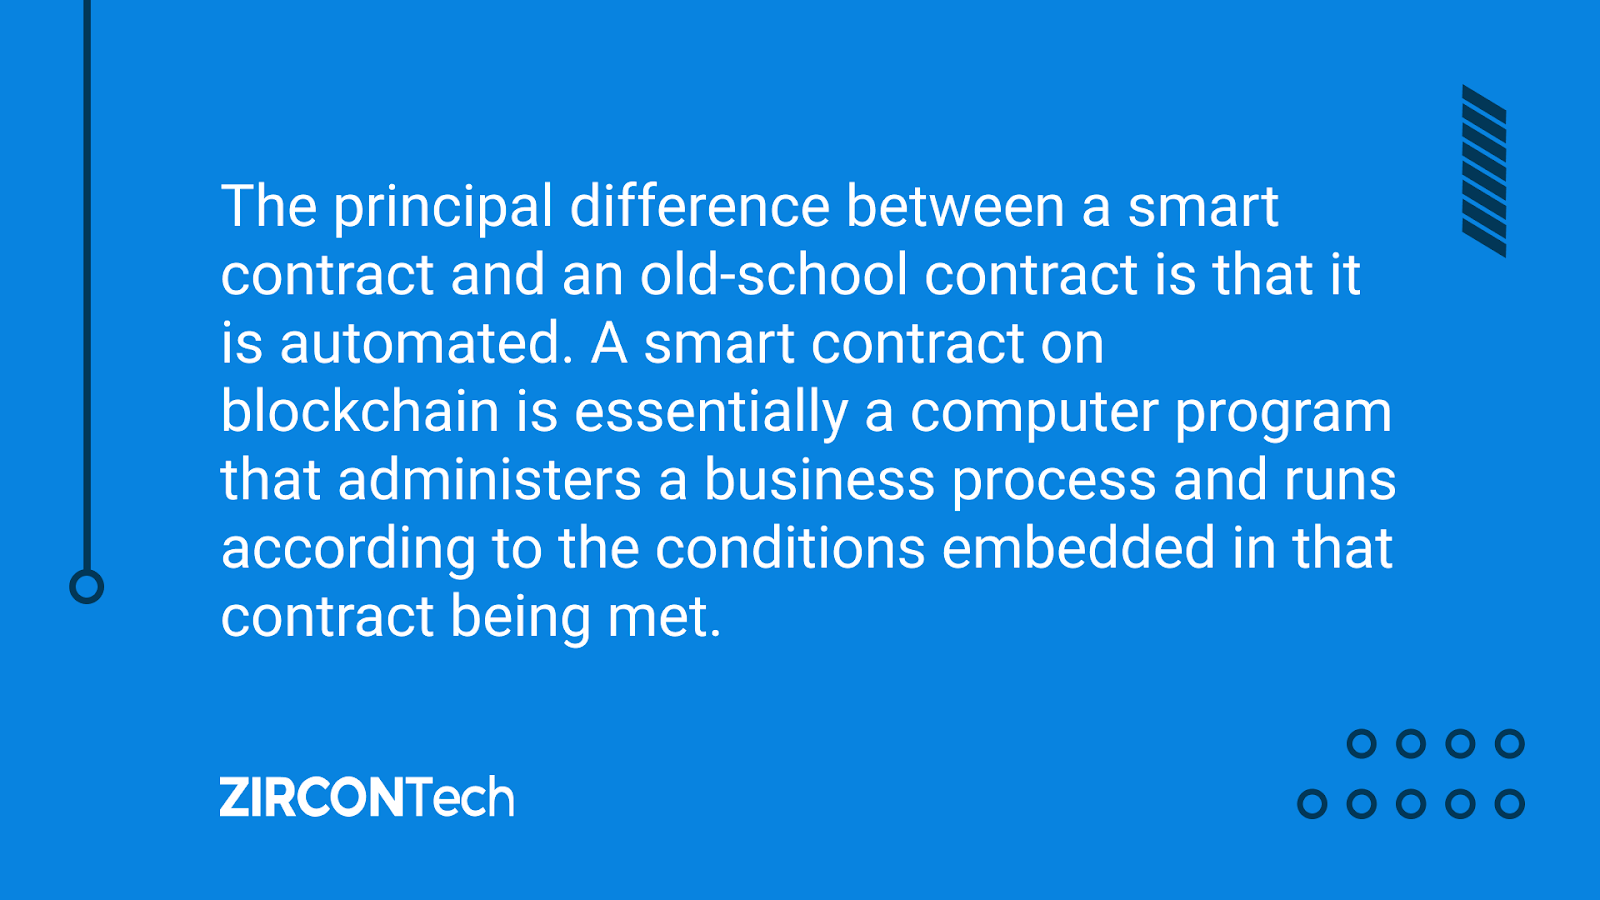 A smart contract on blockchain is an agreement that acts in much the same way as a traditional contract relating to a business arrangement. There, however, is where the similarity ends.